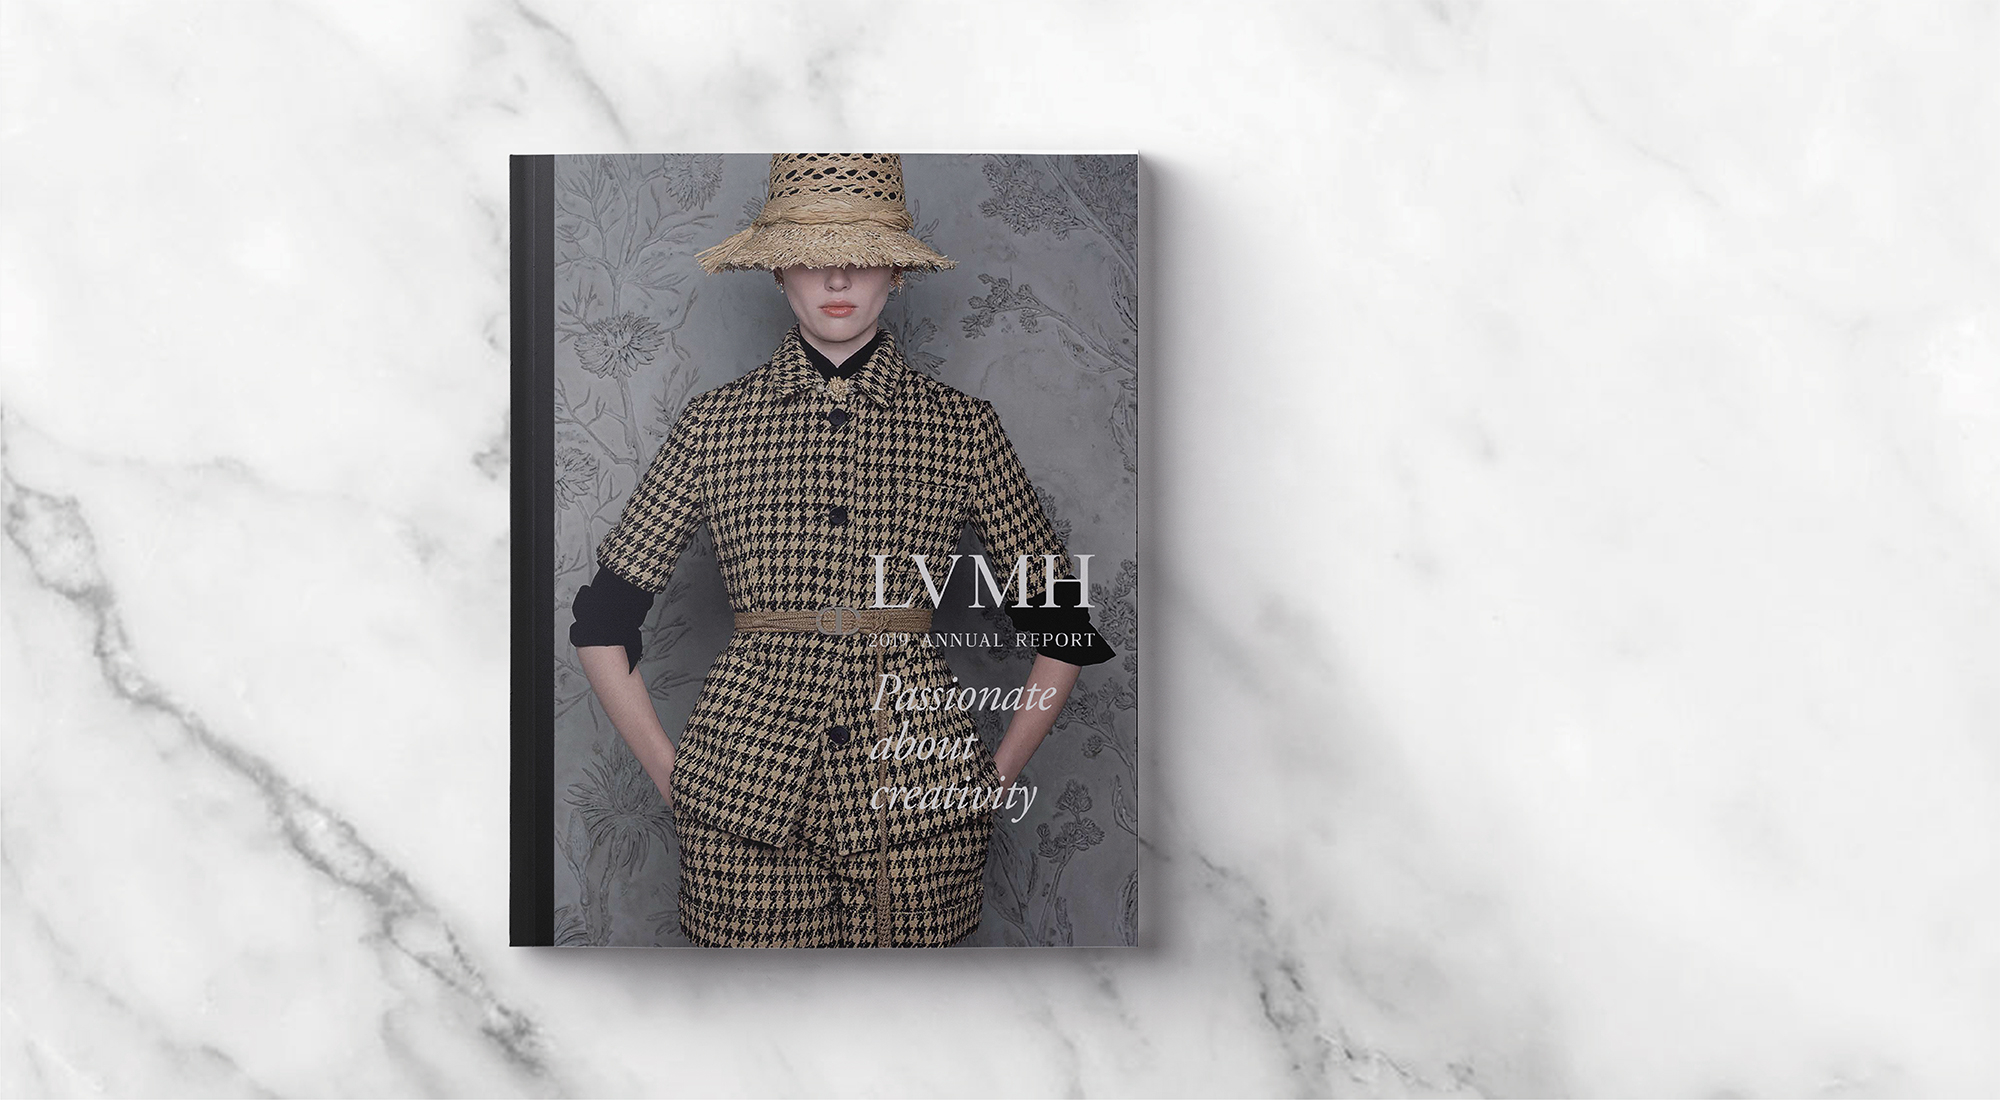 Lvmh Moet Hennessy Louis Vuitton Se Annual Report 2019